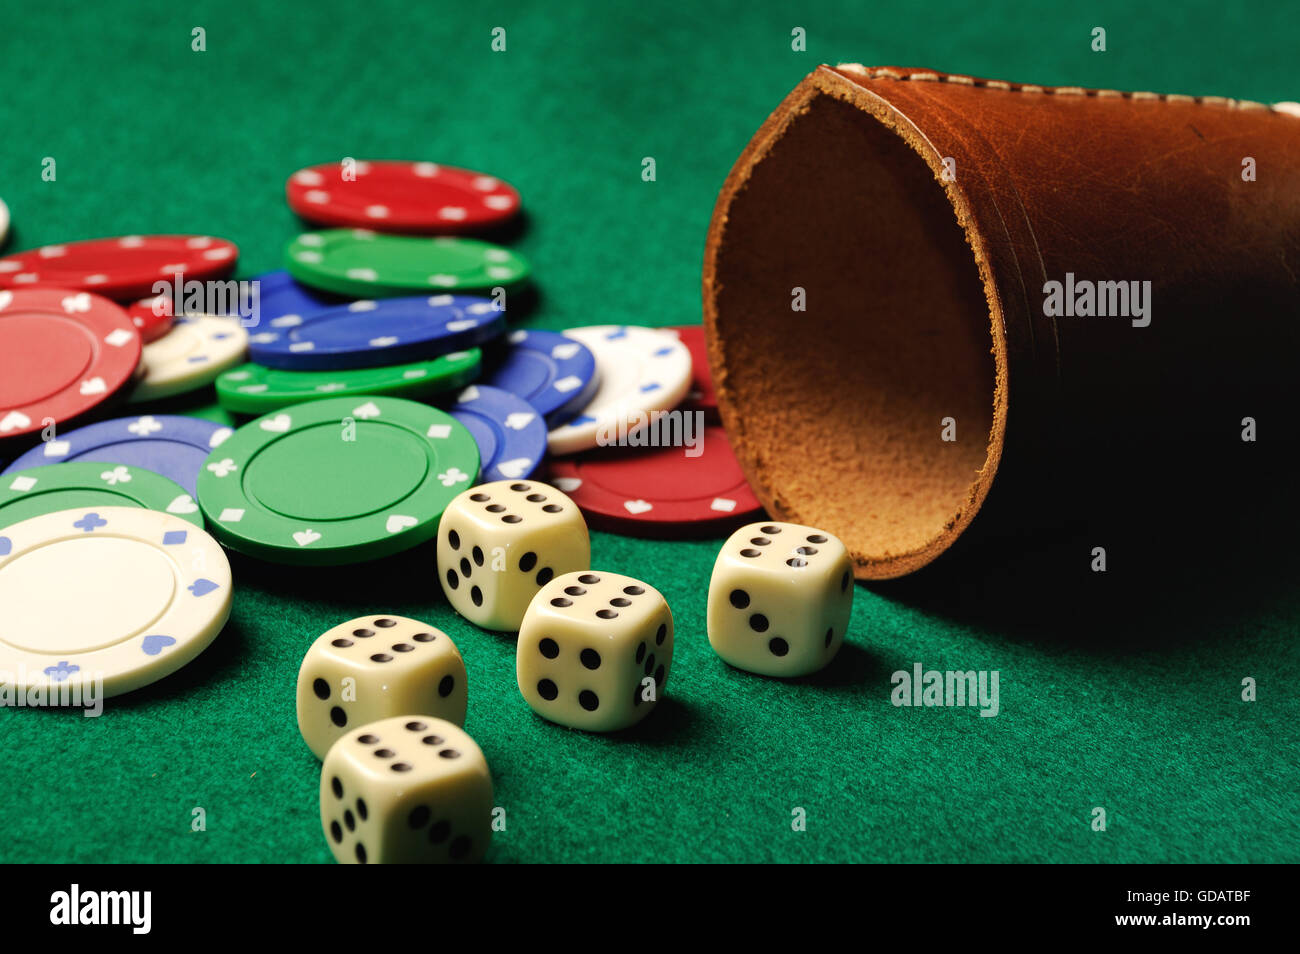 Poker dice with chips on green casino table Stock Photo